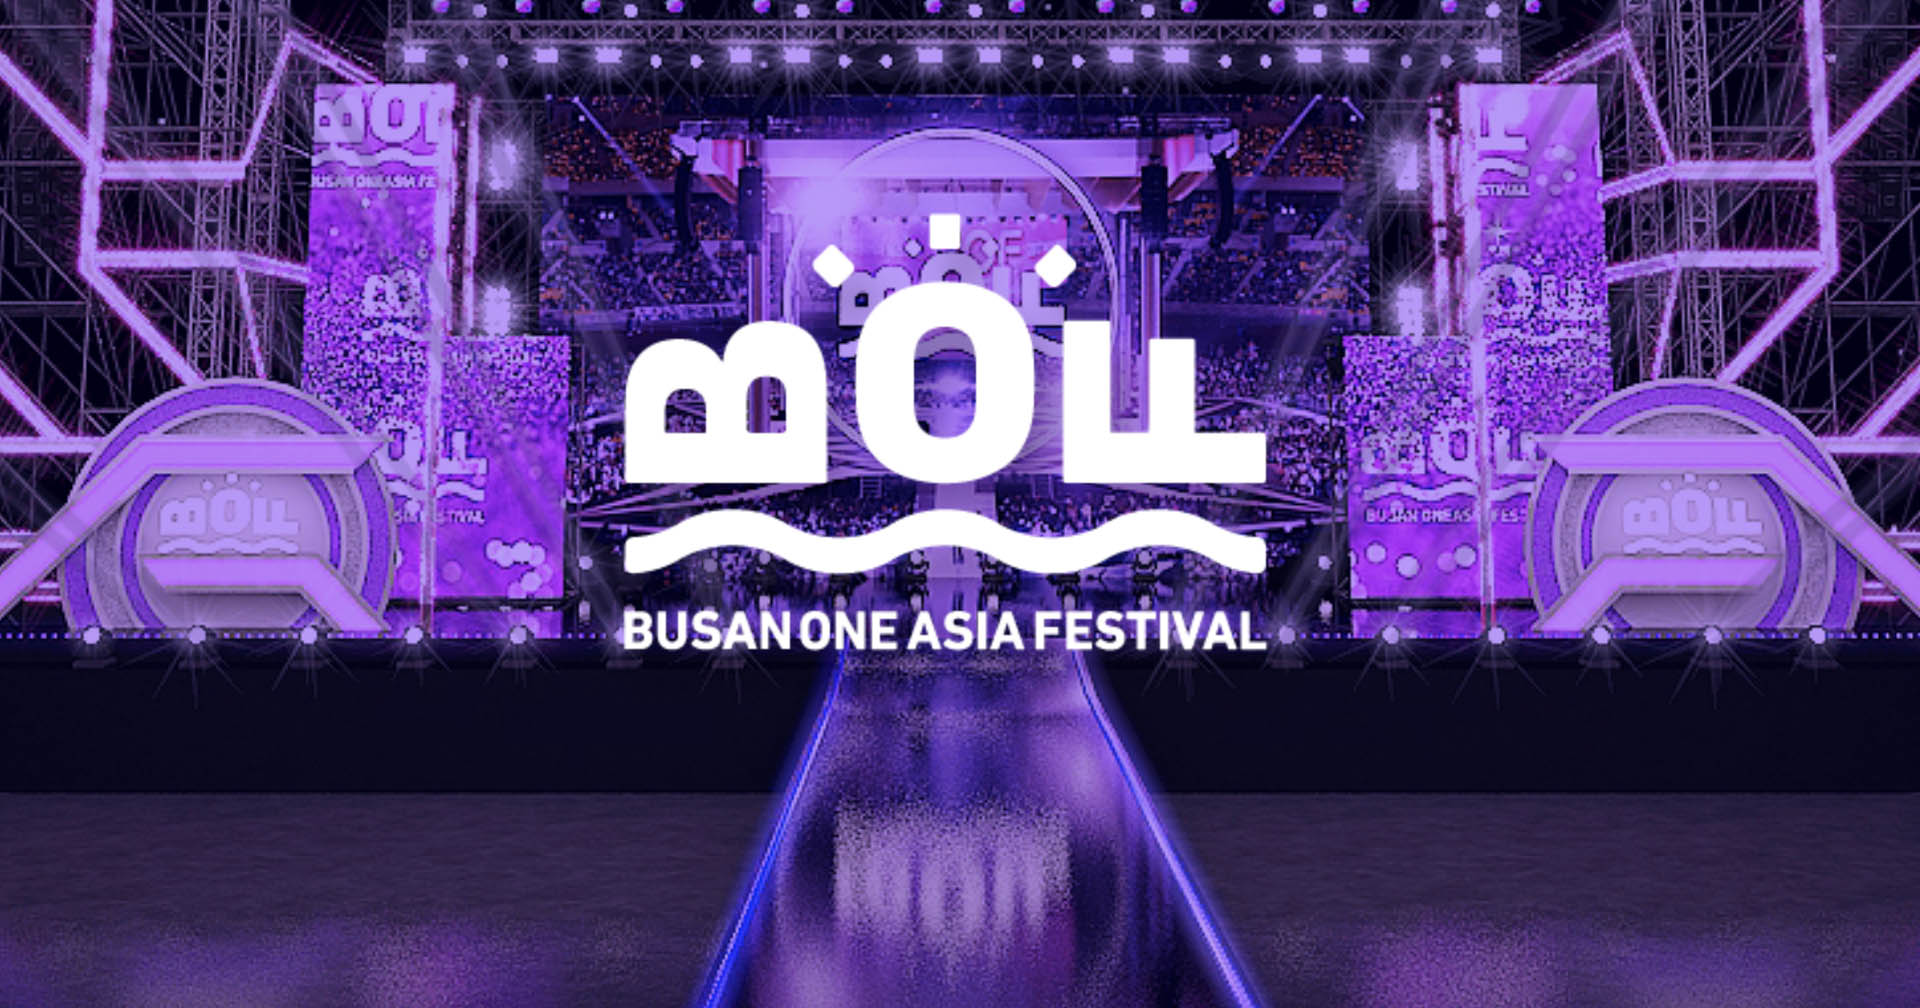 2018 Busan One Asia Festival to Take Place October 20-28